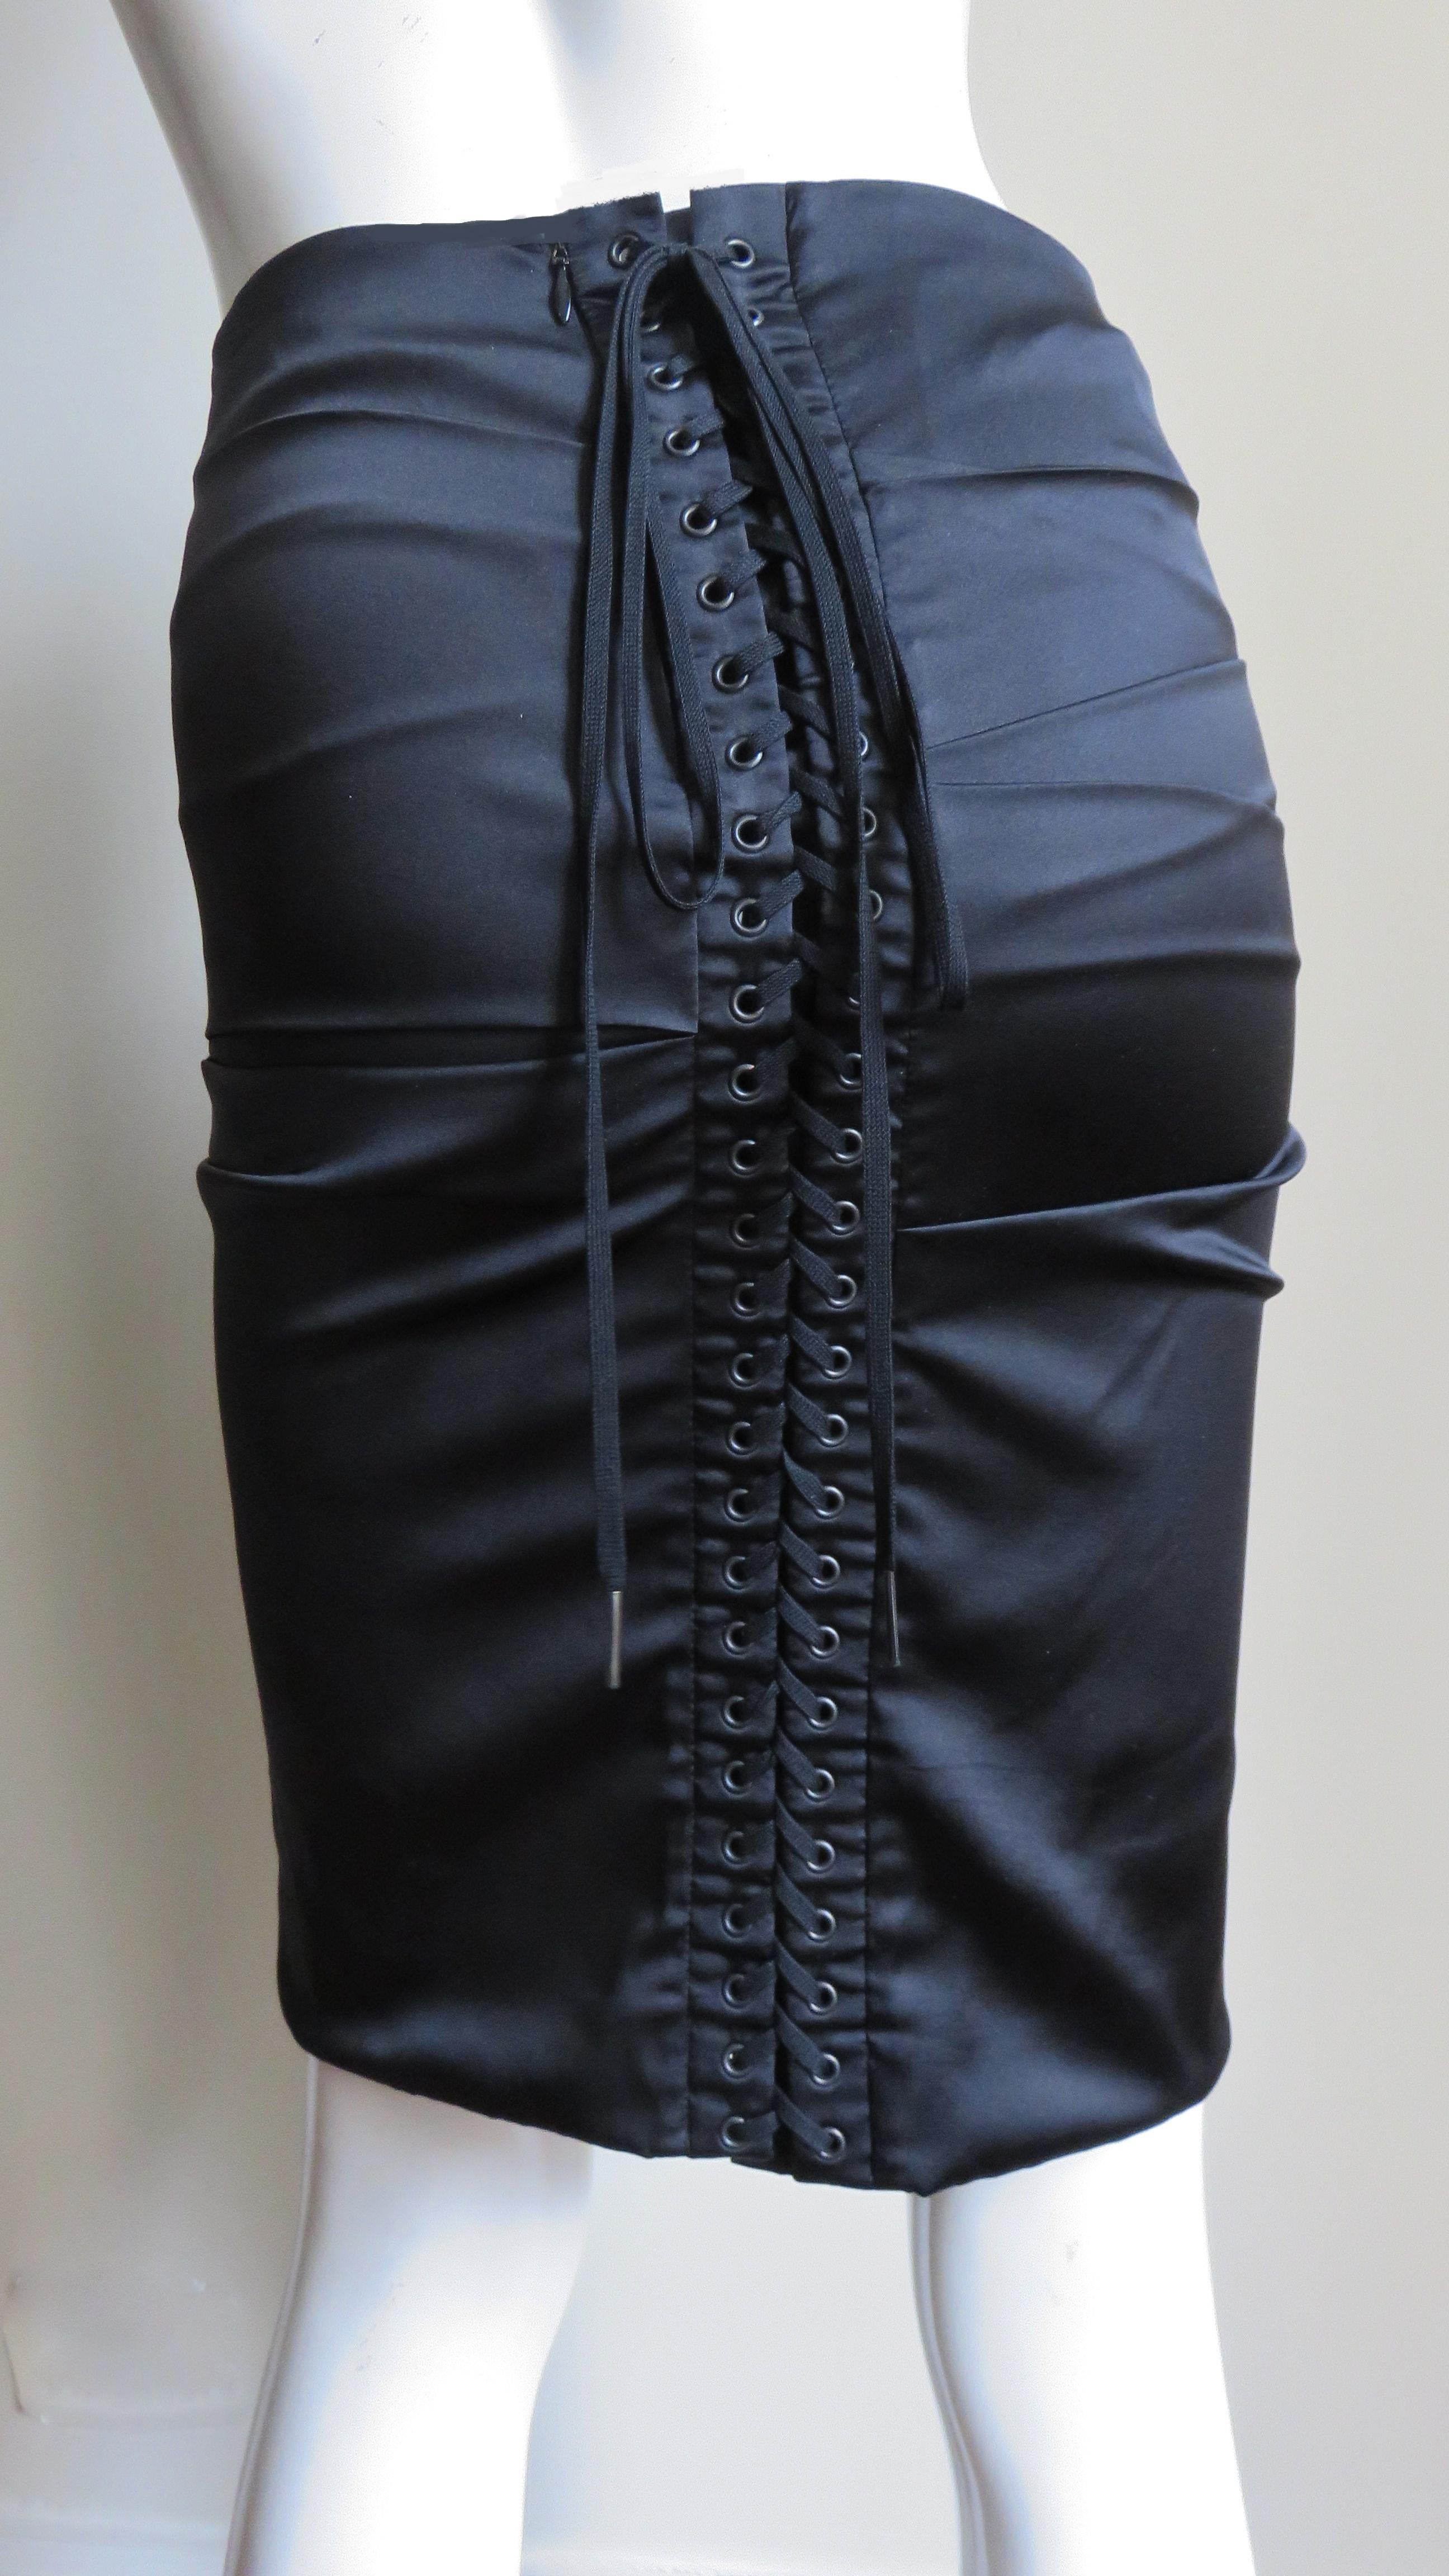 Dolce & Gabbana Lace up Silk Skirt In Excellent Condition For Sale In Water Mill, NY